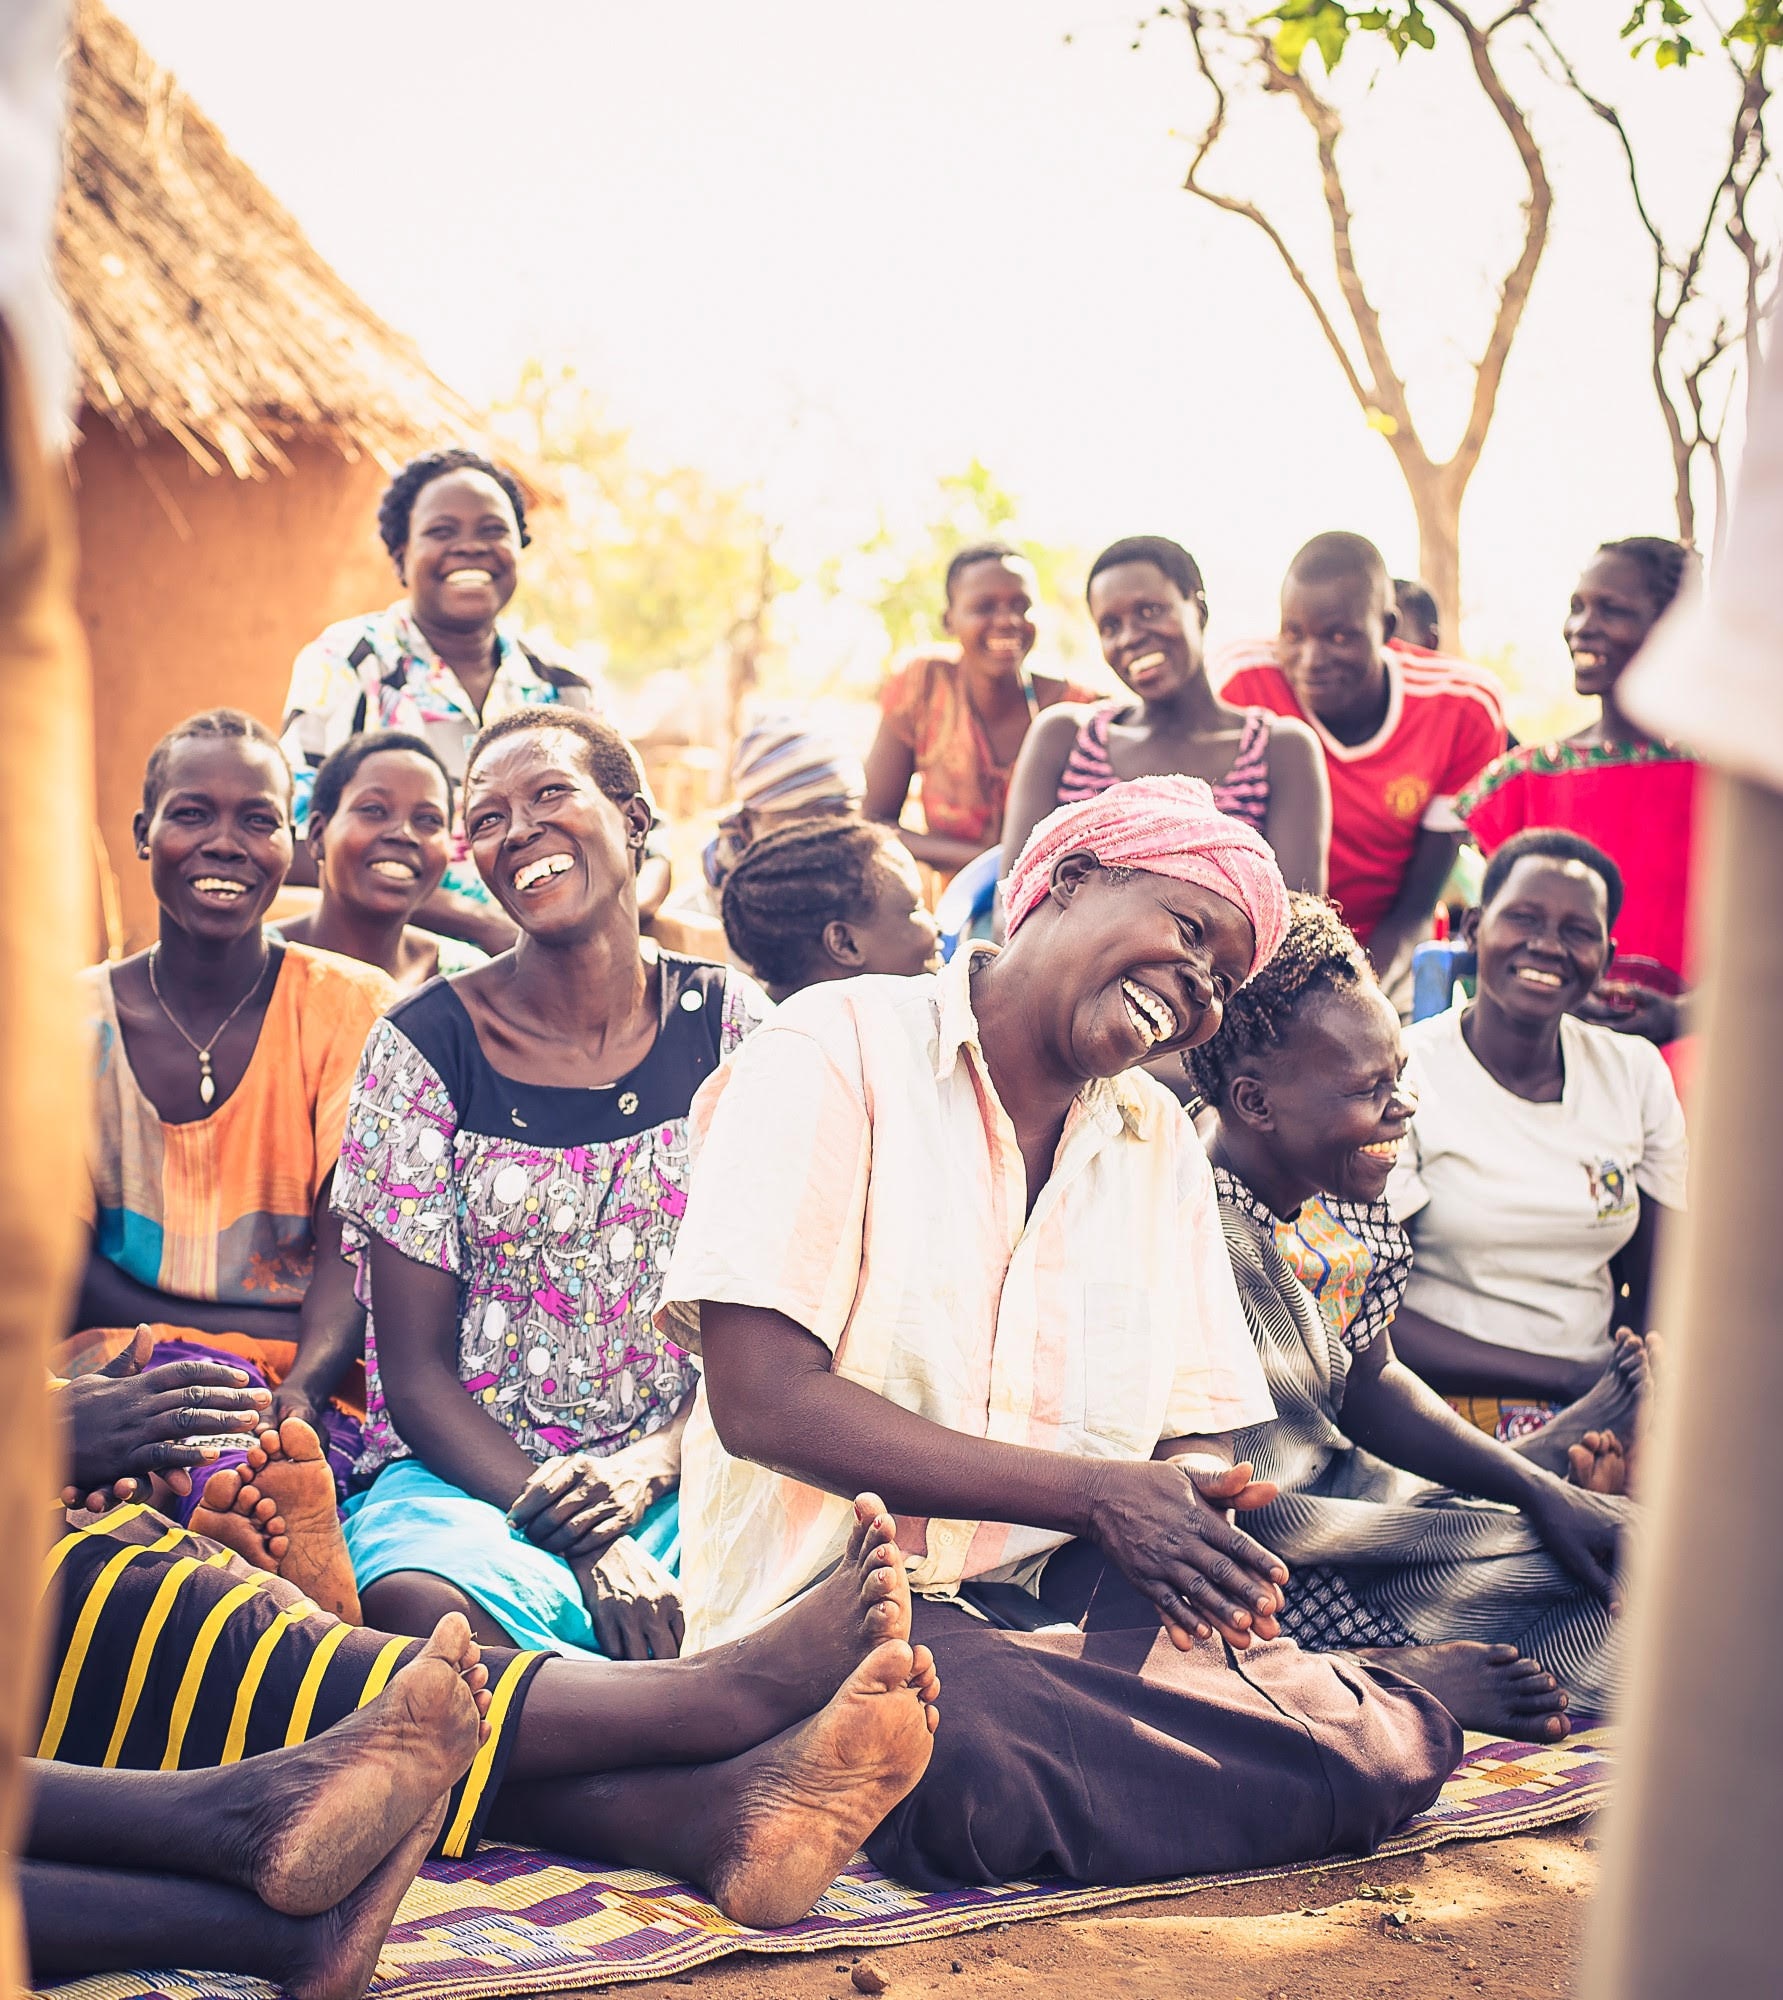 Refugees from Tutapona, an organization that provides trauma rehabilitation, participate in a community discussion in Adjumani, Uganda. Chaplain (Capt.) Benajmin Quintanilla, assigned to the 28th Bomb Wing, visited Adjumani to work alongside Tutapona in January 2019. (Courtesy photo by Candice Lassey)